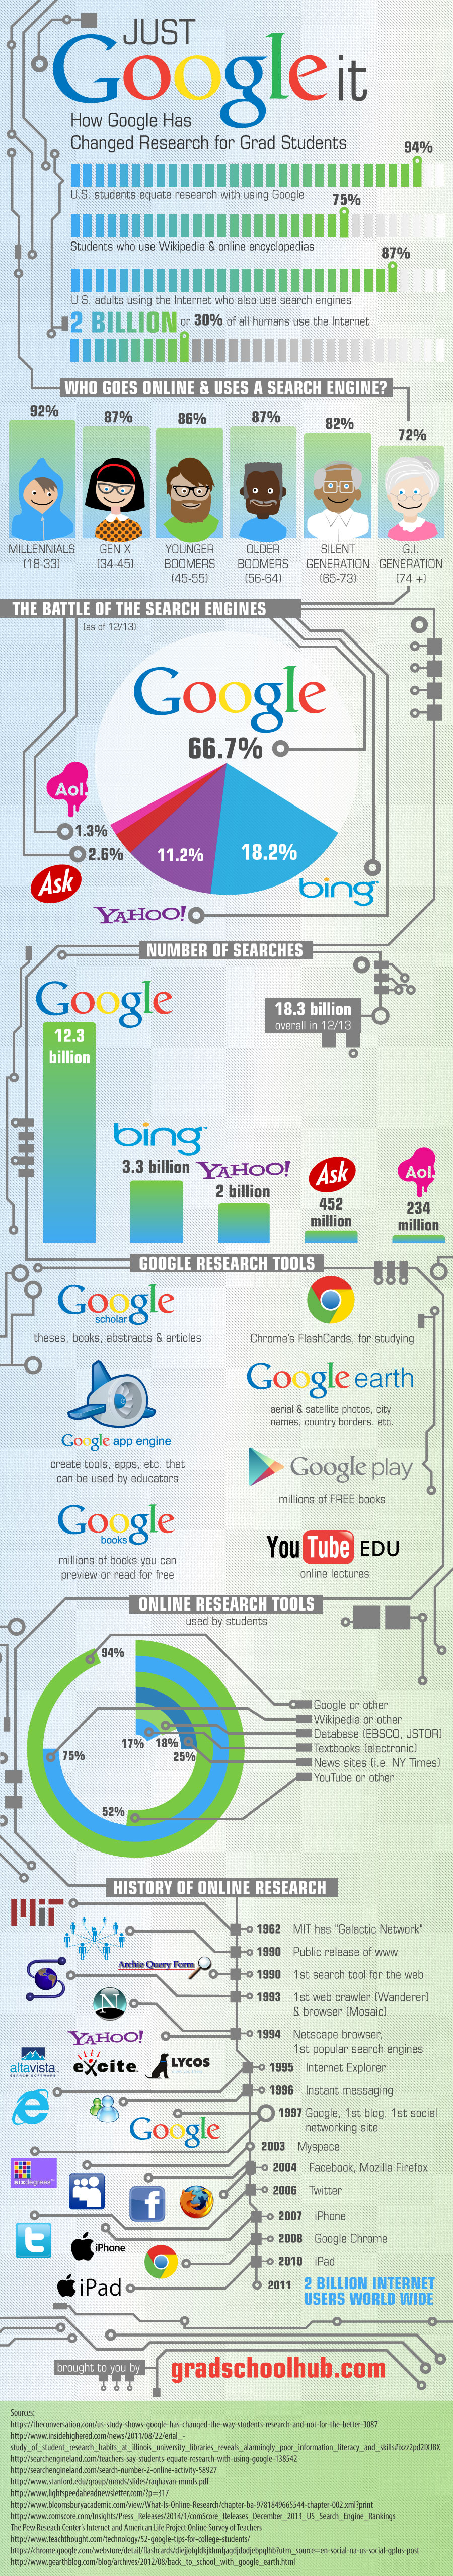 Google-Changed-Research-1